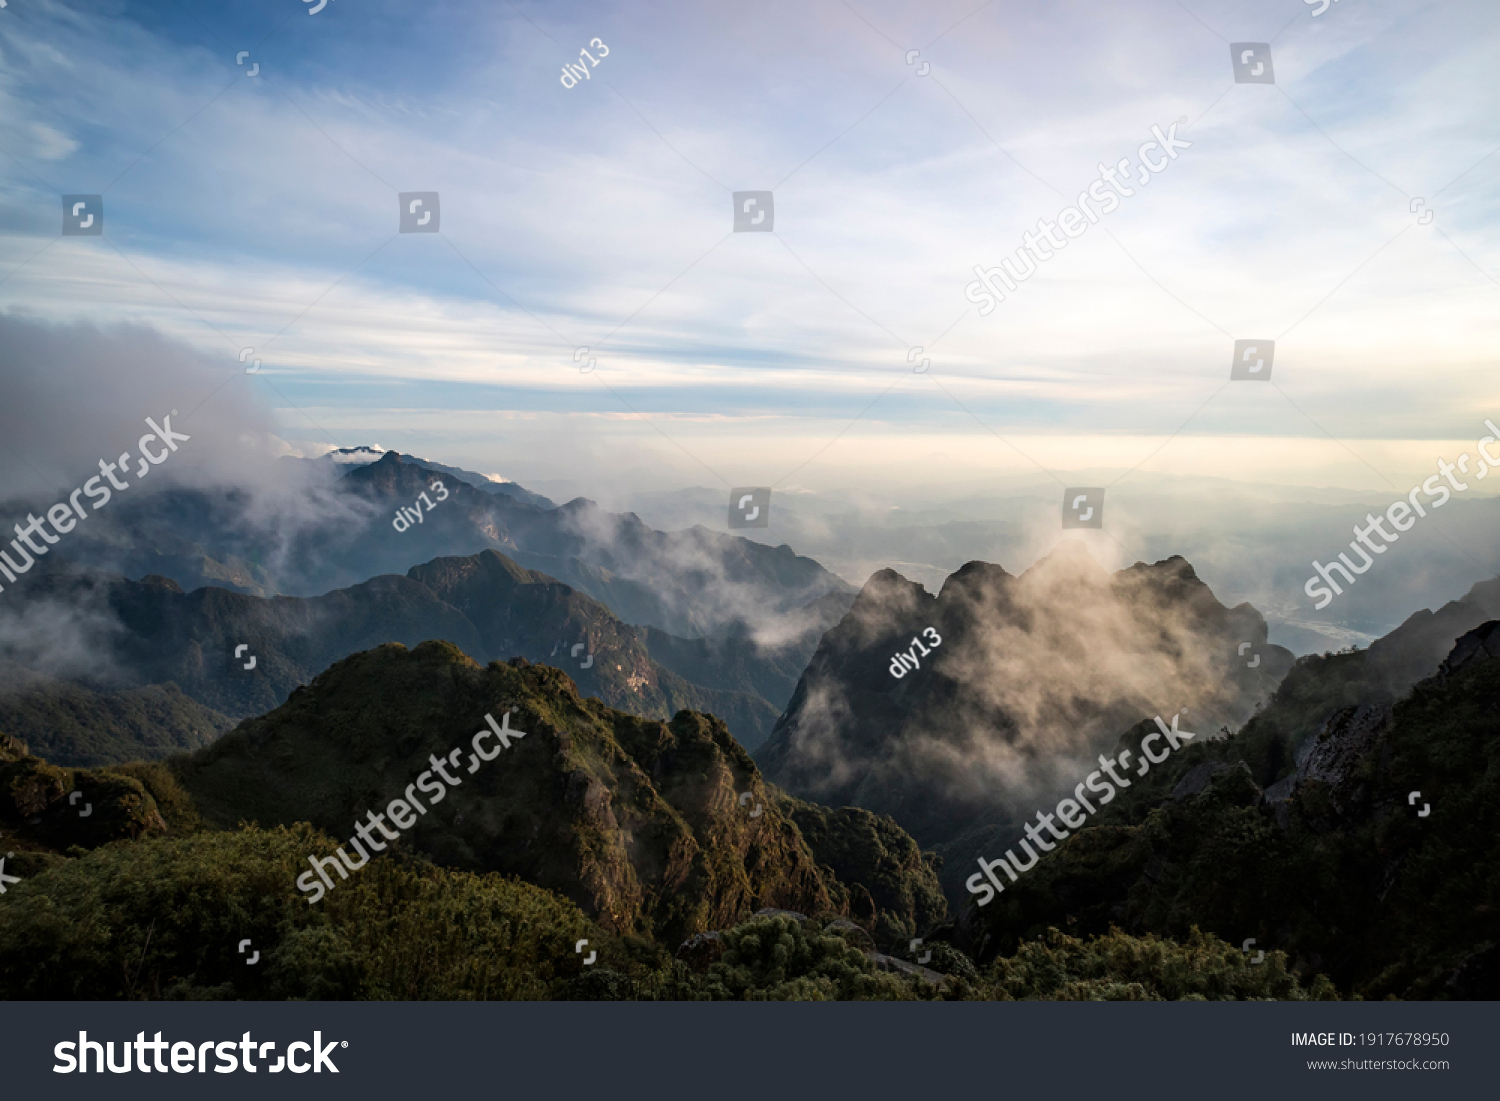 Fansipan mountain the highest mountain in the Indochinese Peninsula comprising Vietnam, Laos, and Cambodia, hence its nickname Roof of Indochina . Lao Cai, Vietnam. #1917678950